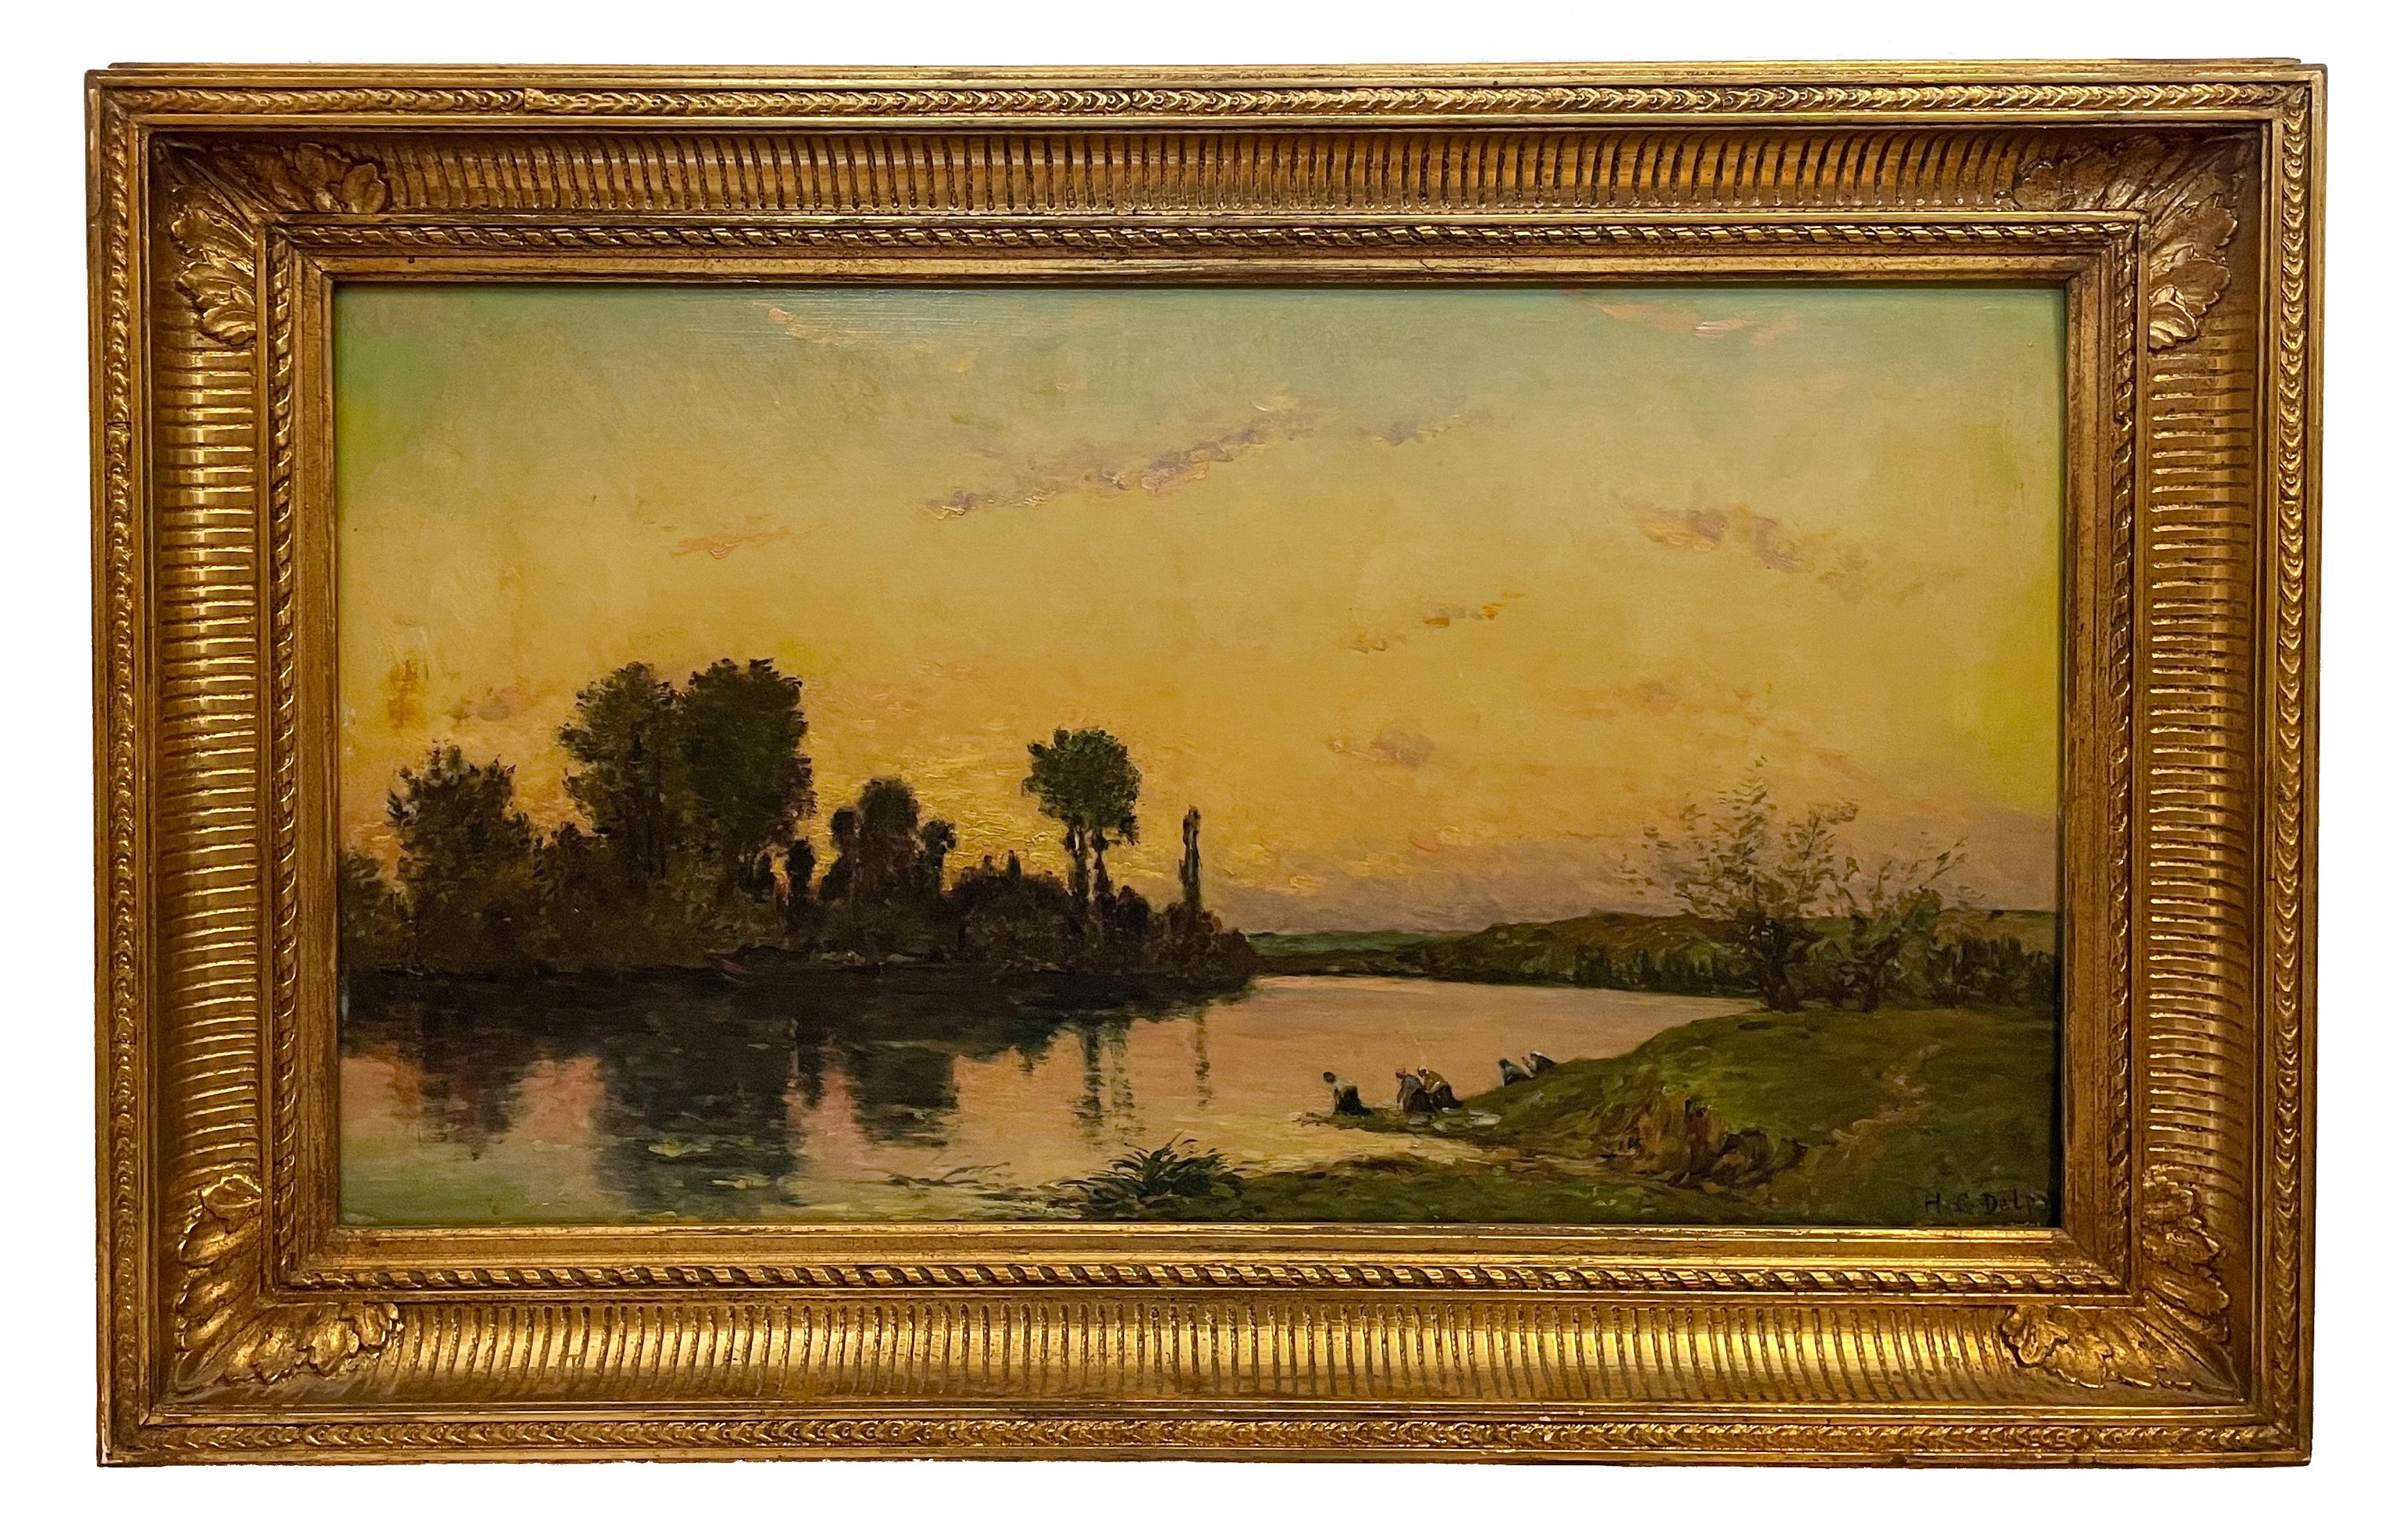 Washerwomen along Riverbank, Sunset - Painting by Hippolyte Camille Delpy